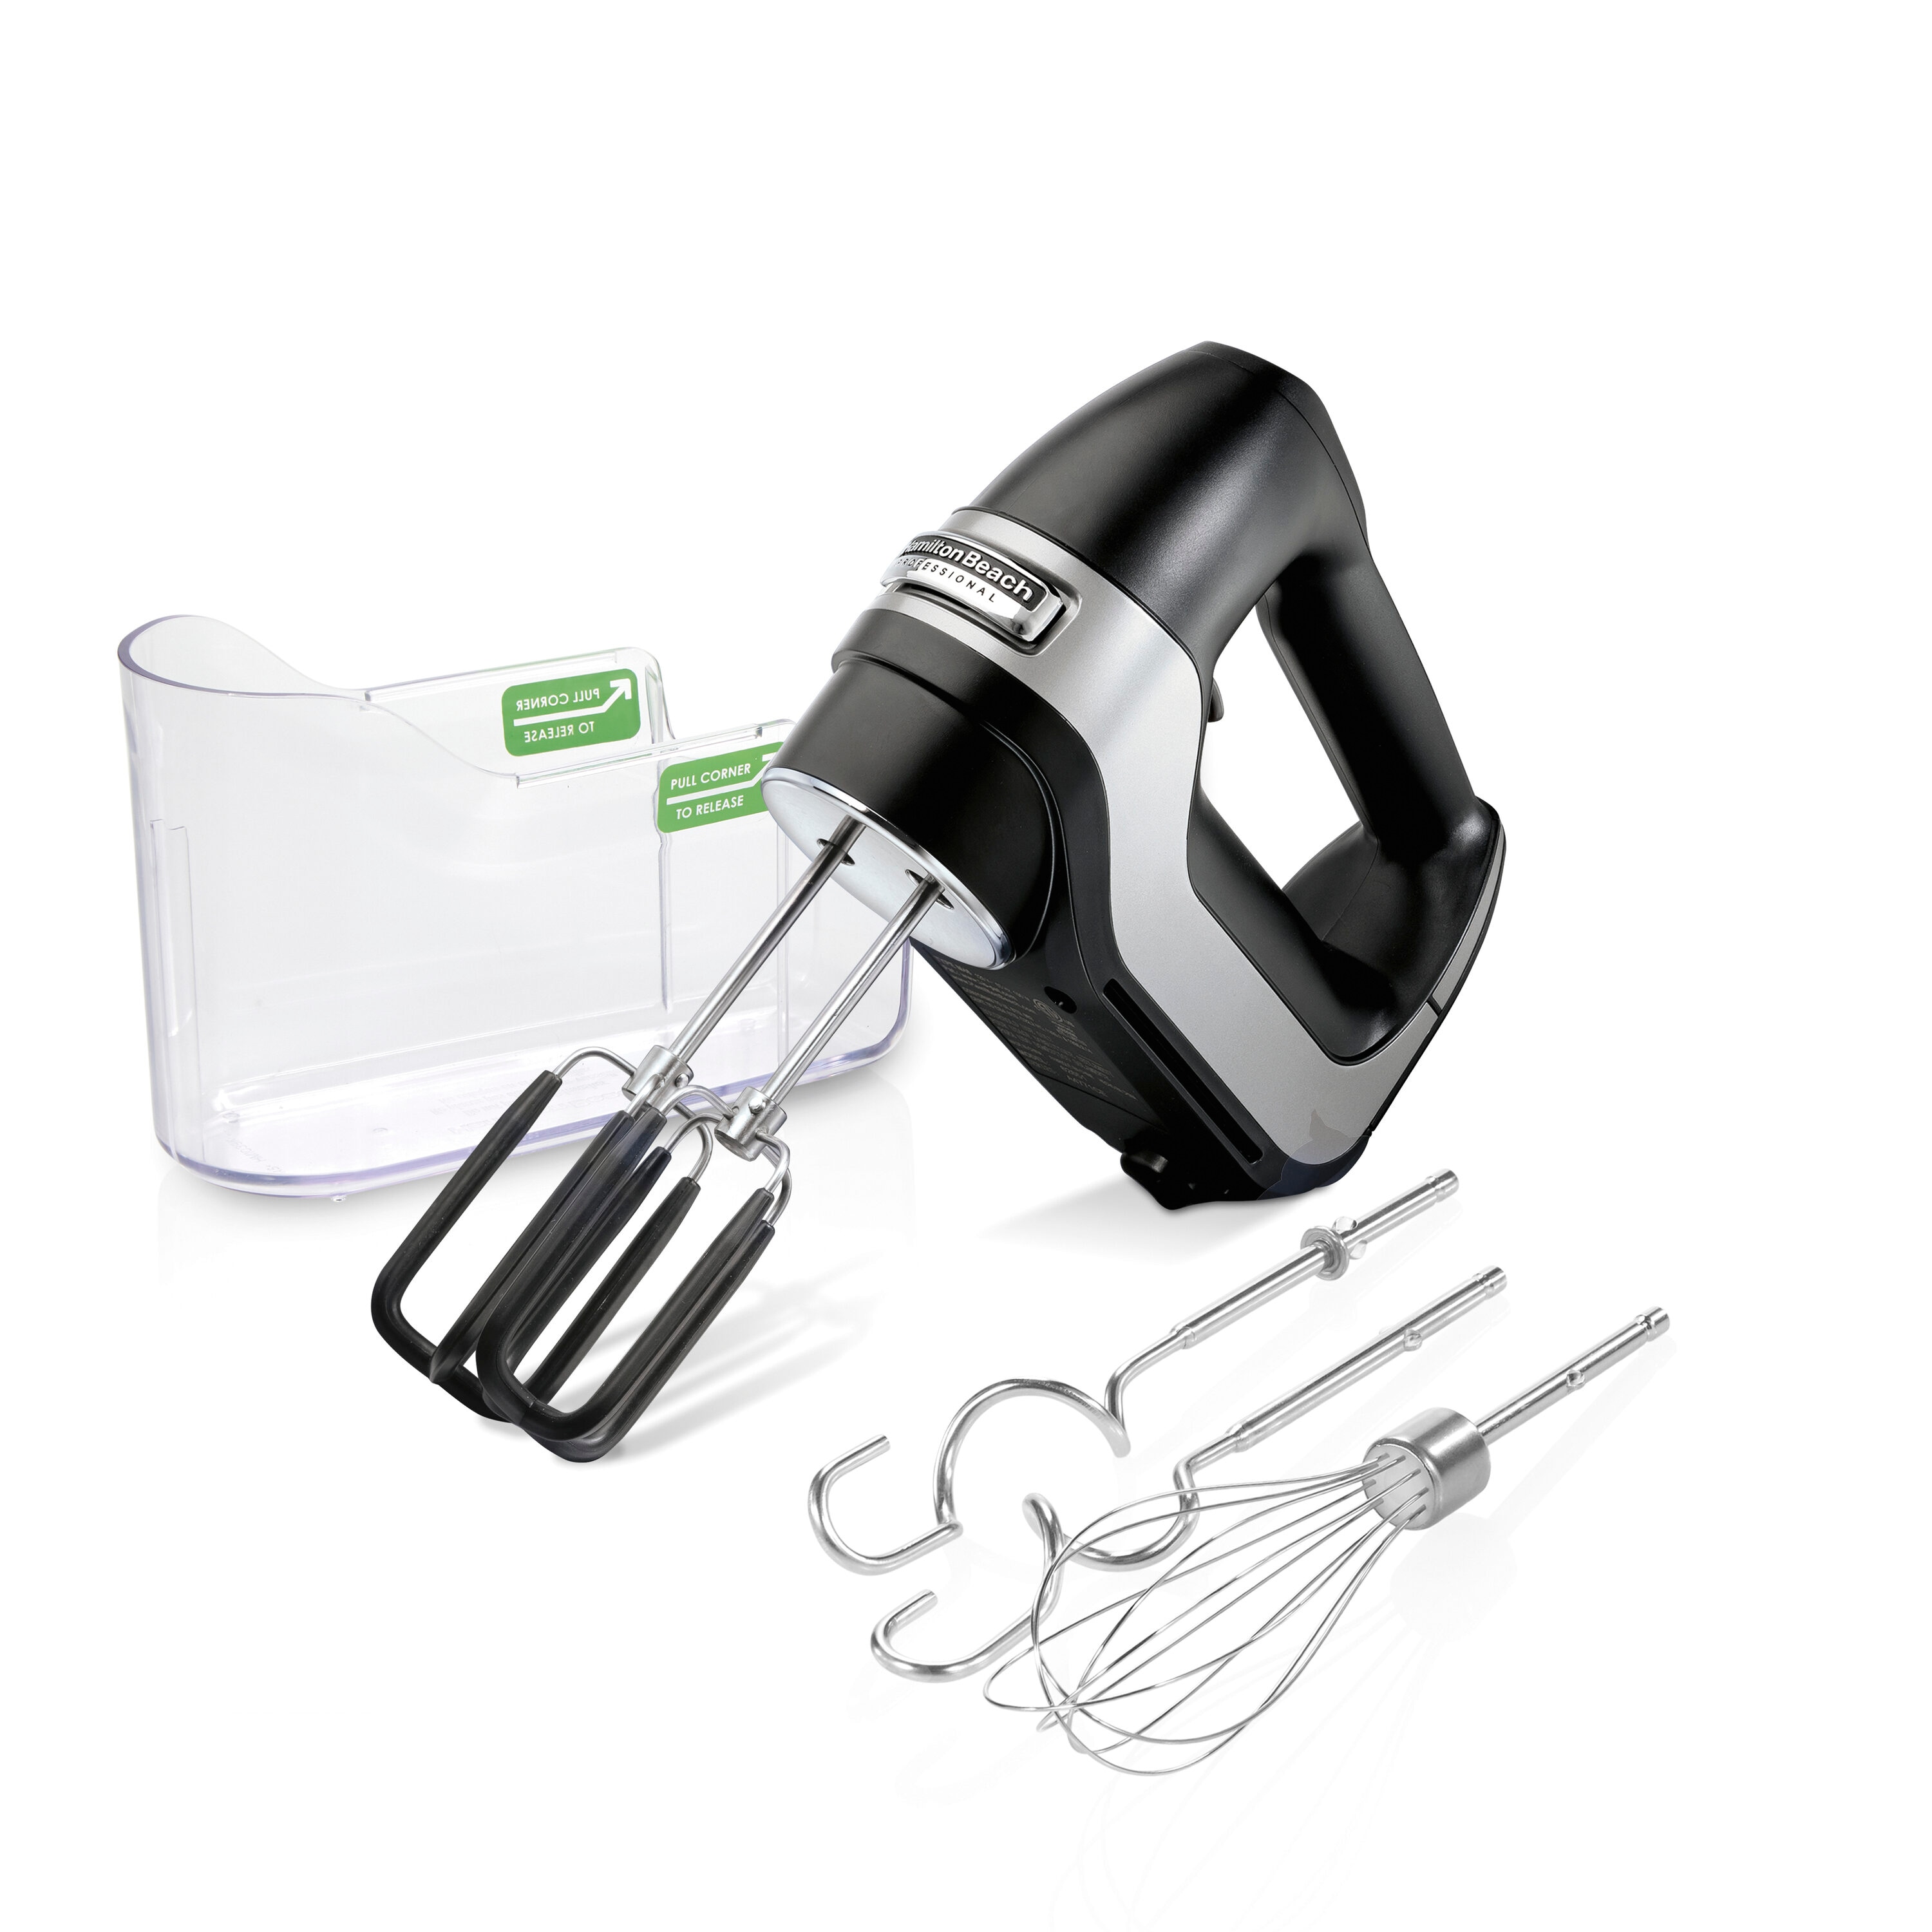 Hamilton Beach Professional The Hamilton Beach Professional 7 Speed Hand  Mixer has a speed for every recipe, a slow start to prevent splatters and a  QuickBurst at every level. It includes stainless